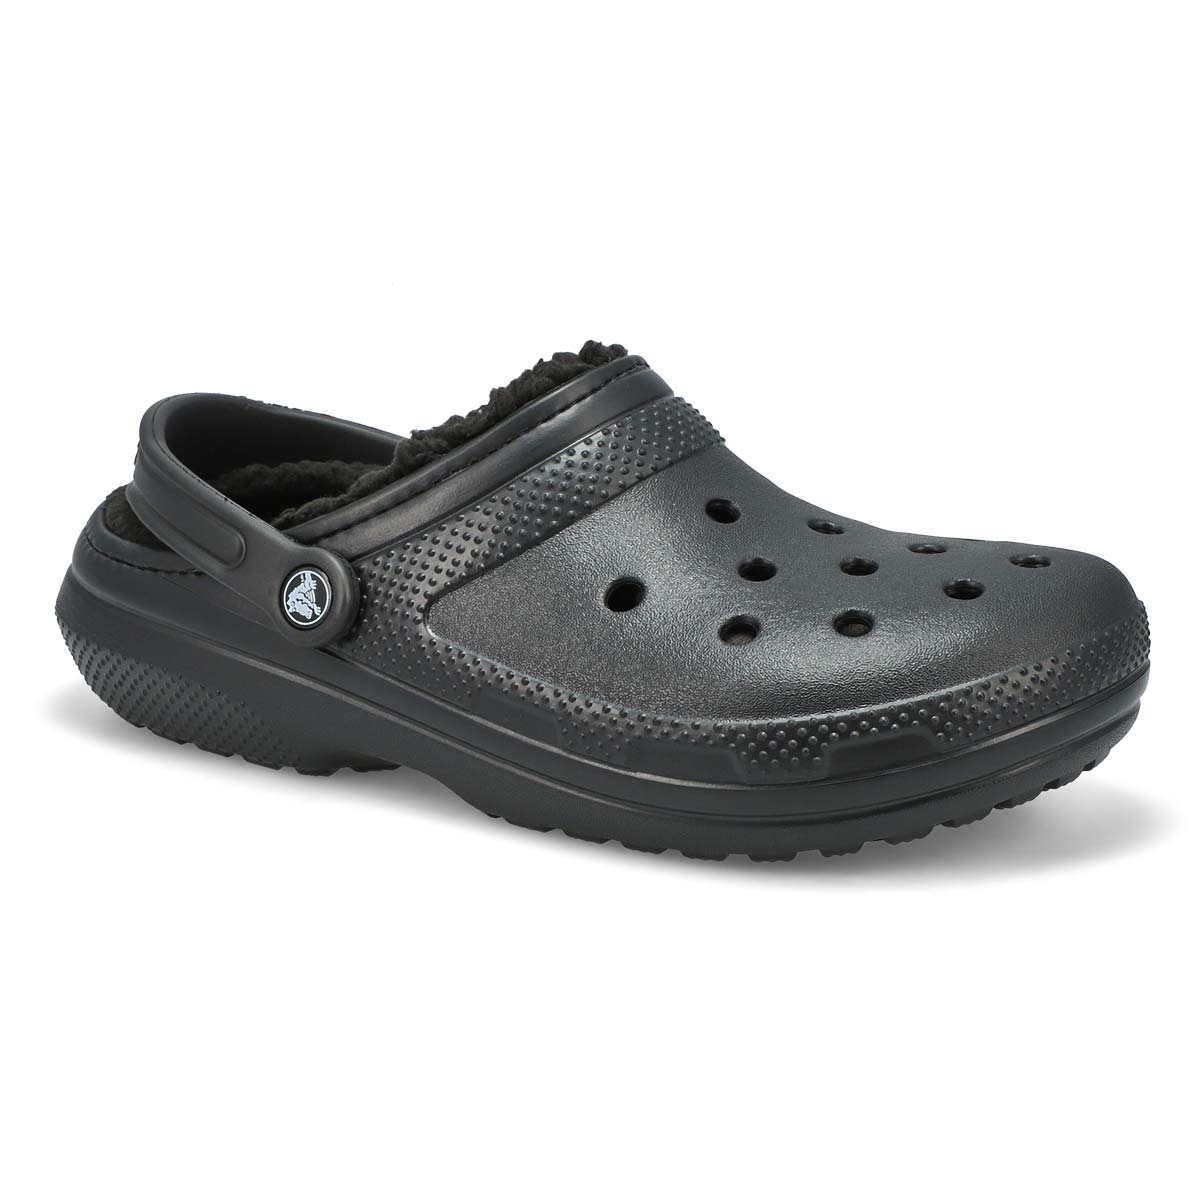 white lined crocs size 9